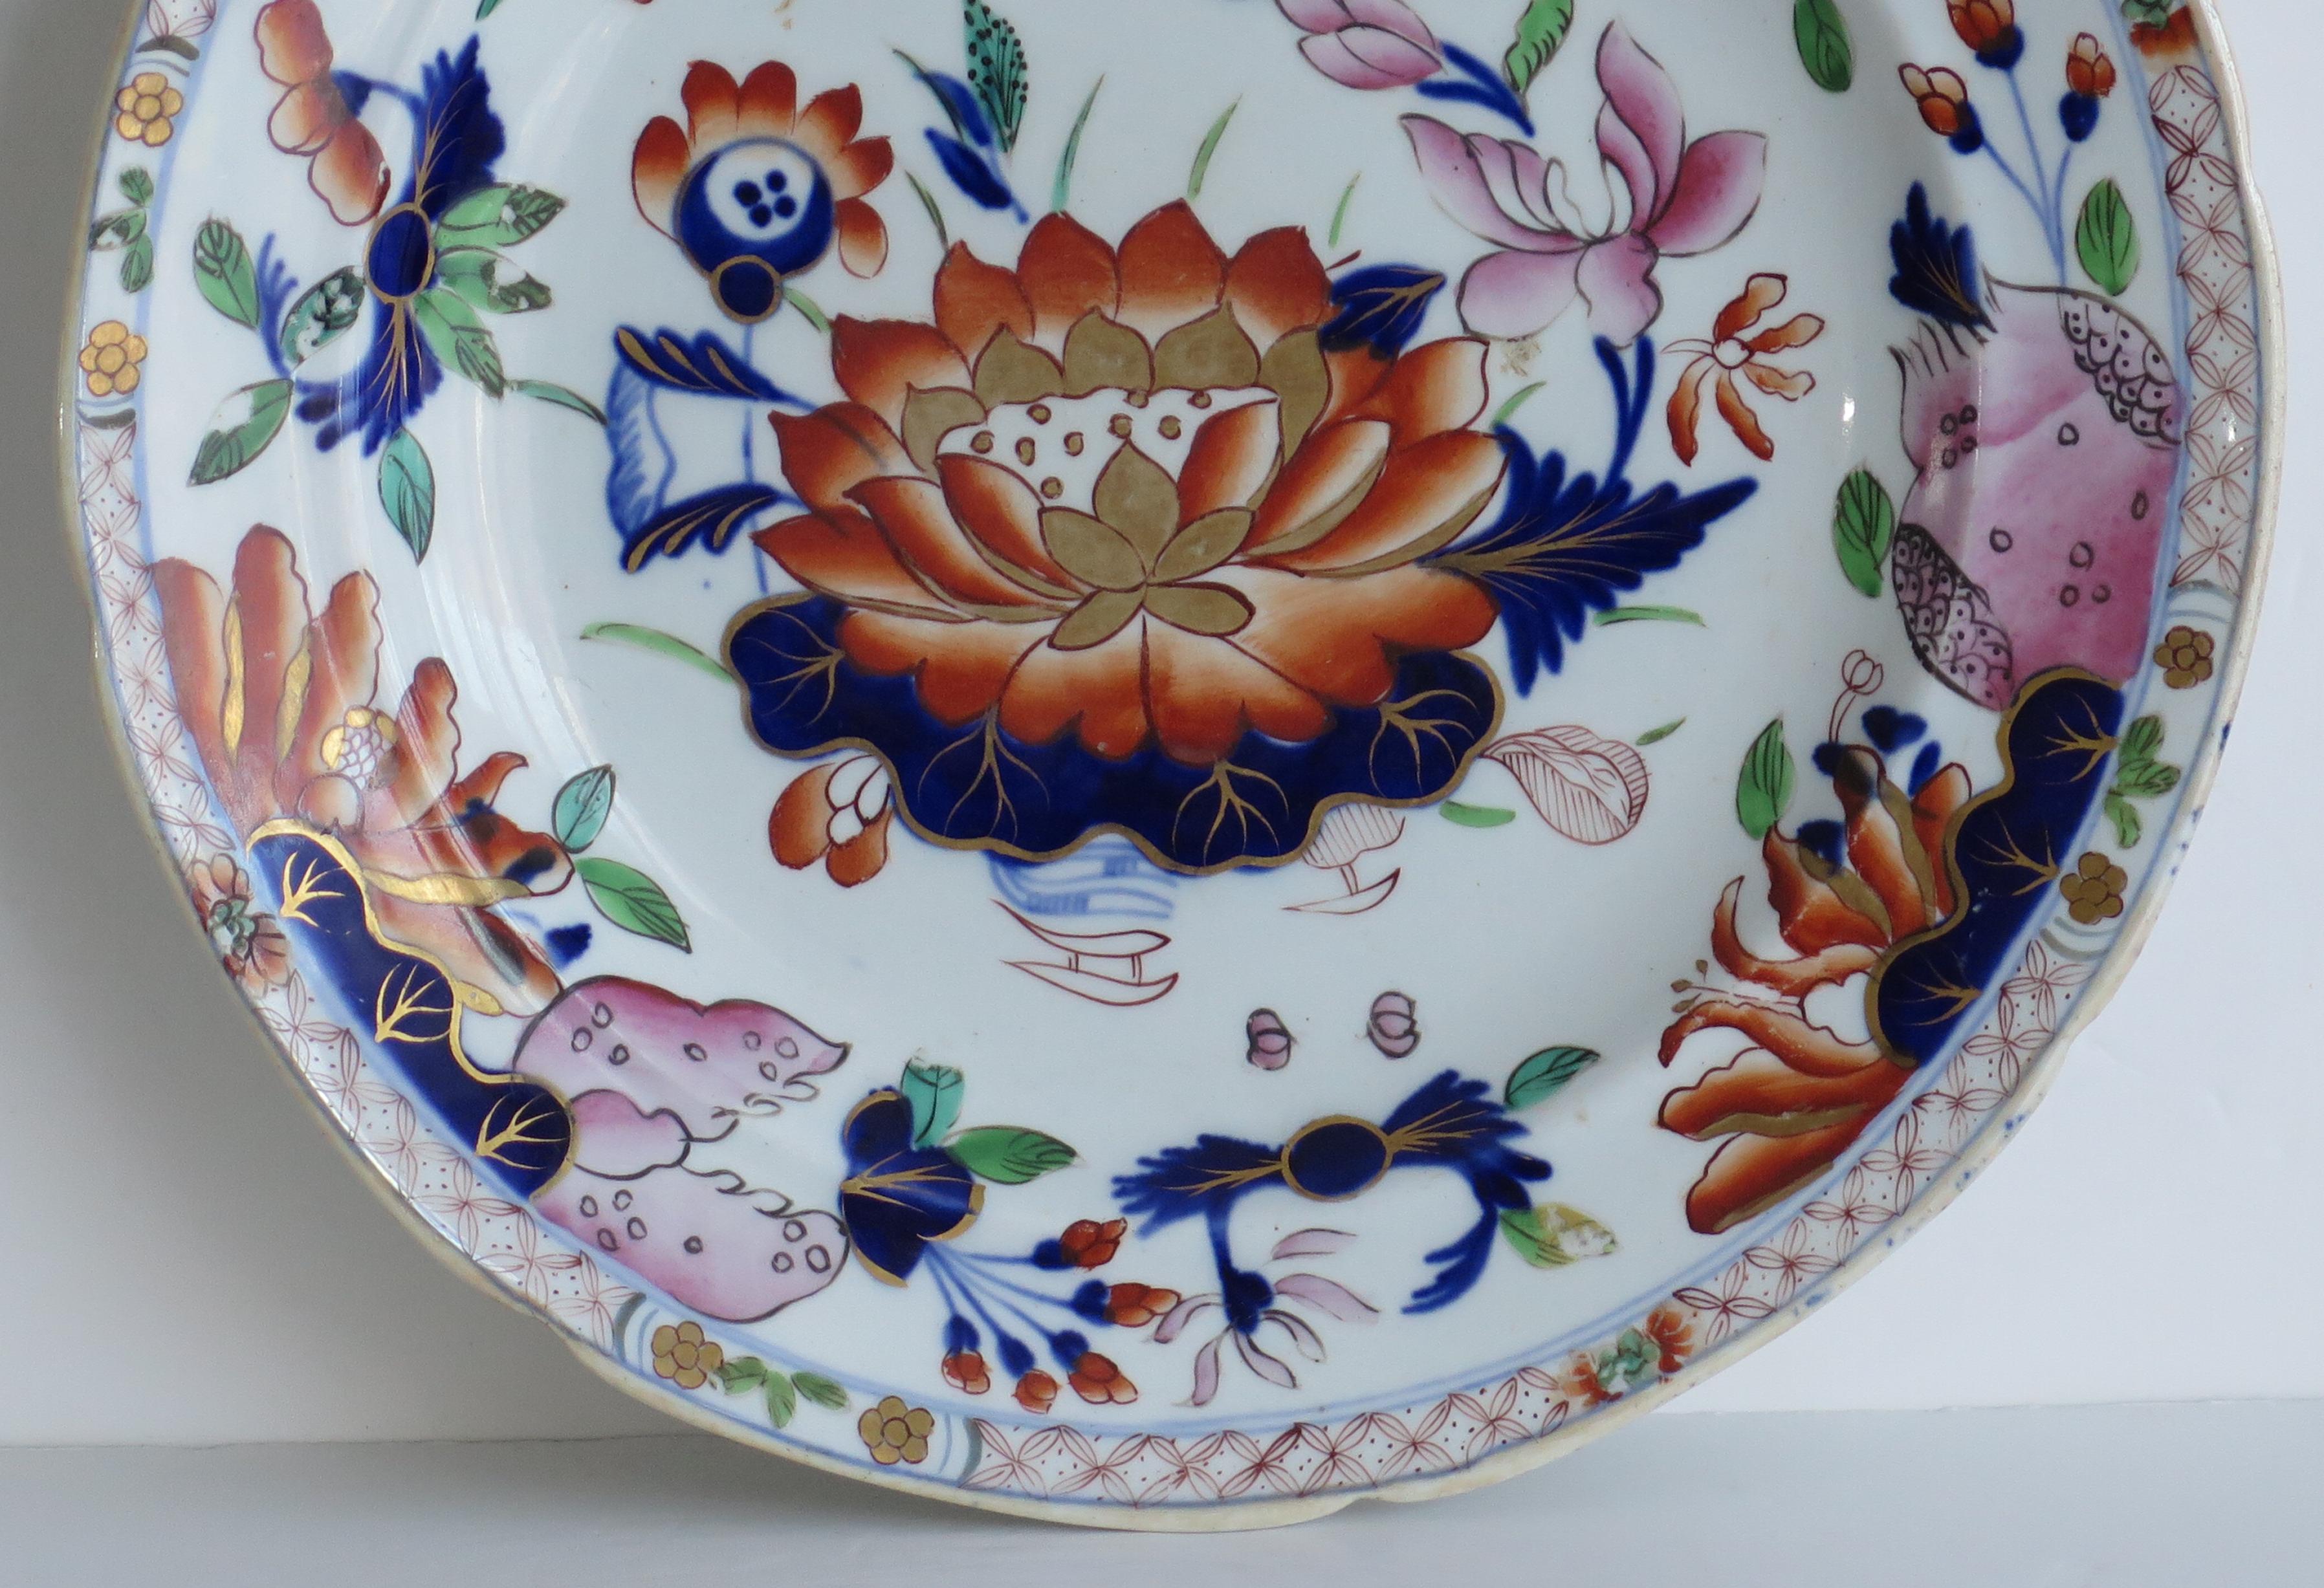 This is a very good Mason's Ironstone pottery dinner plate in the very decorative Water Lily pattern, produced by the Mason's factory at Lane Delph, Staffordshire, England, circa 1835.

The plate is circular with an indented rim.

It is well